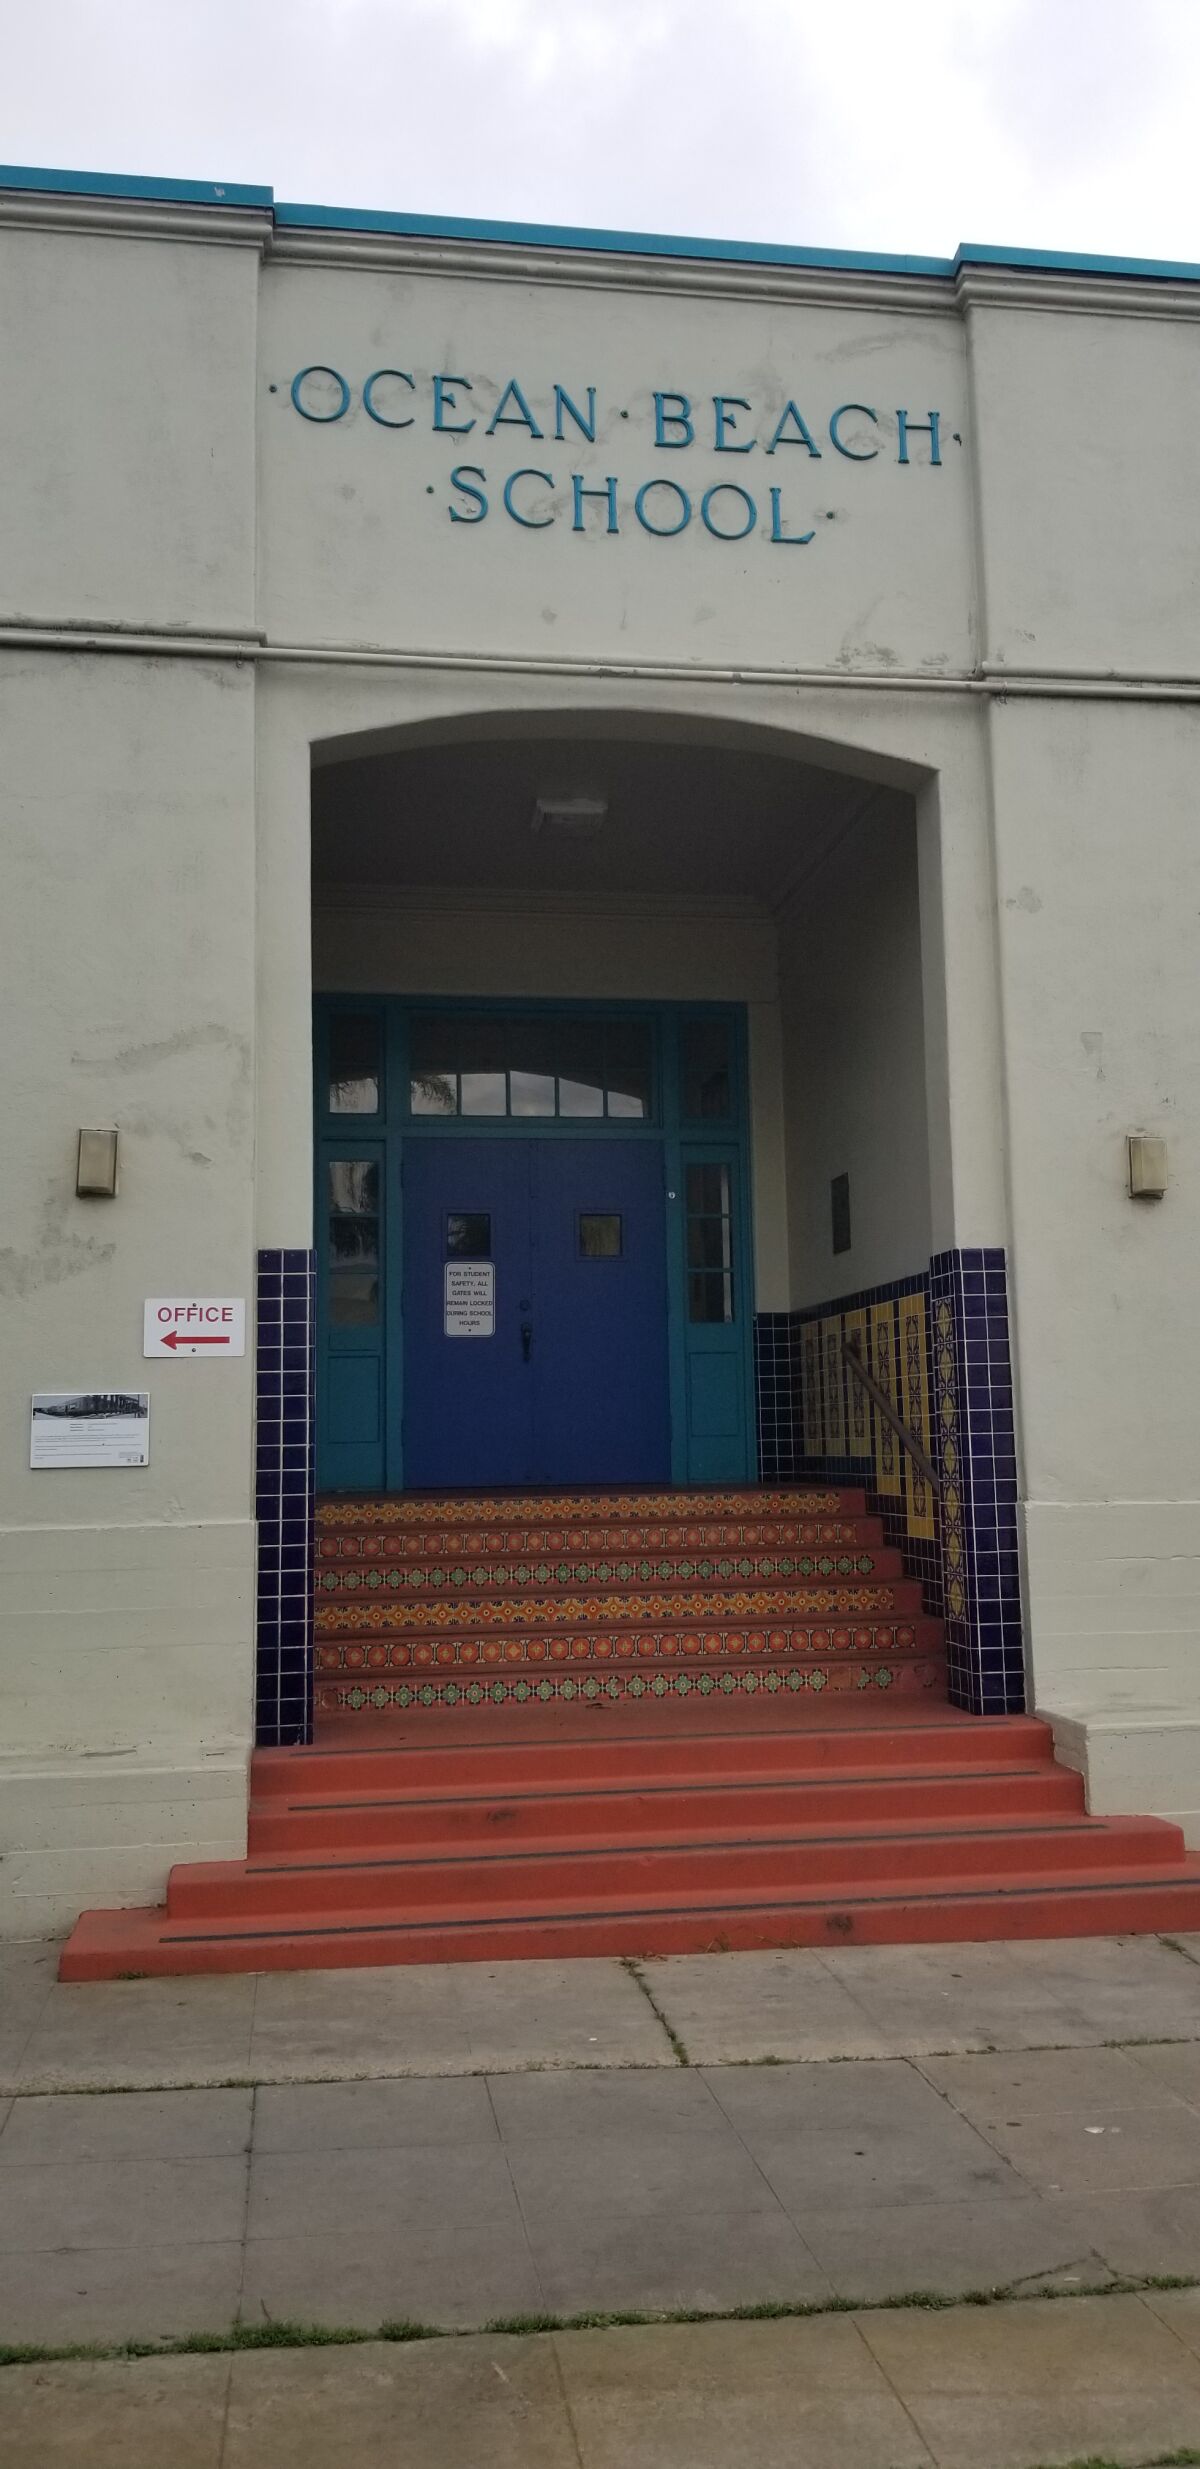 The historical plaque at OB Elementary School can be seen to the left of the door.